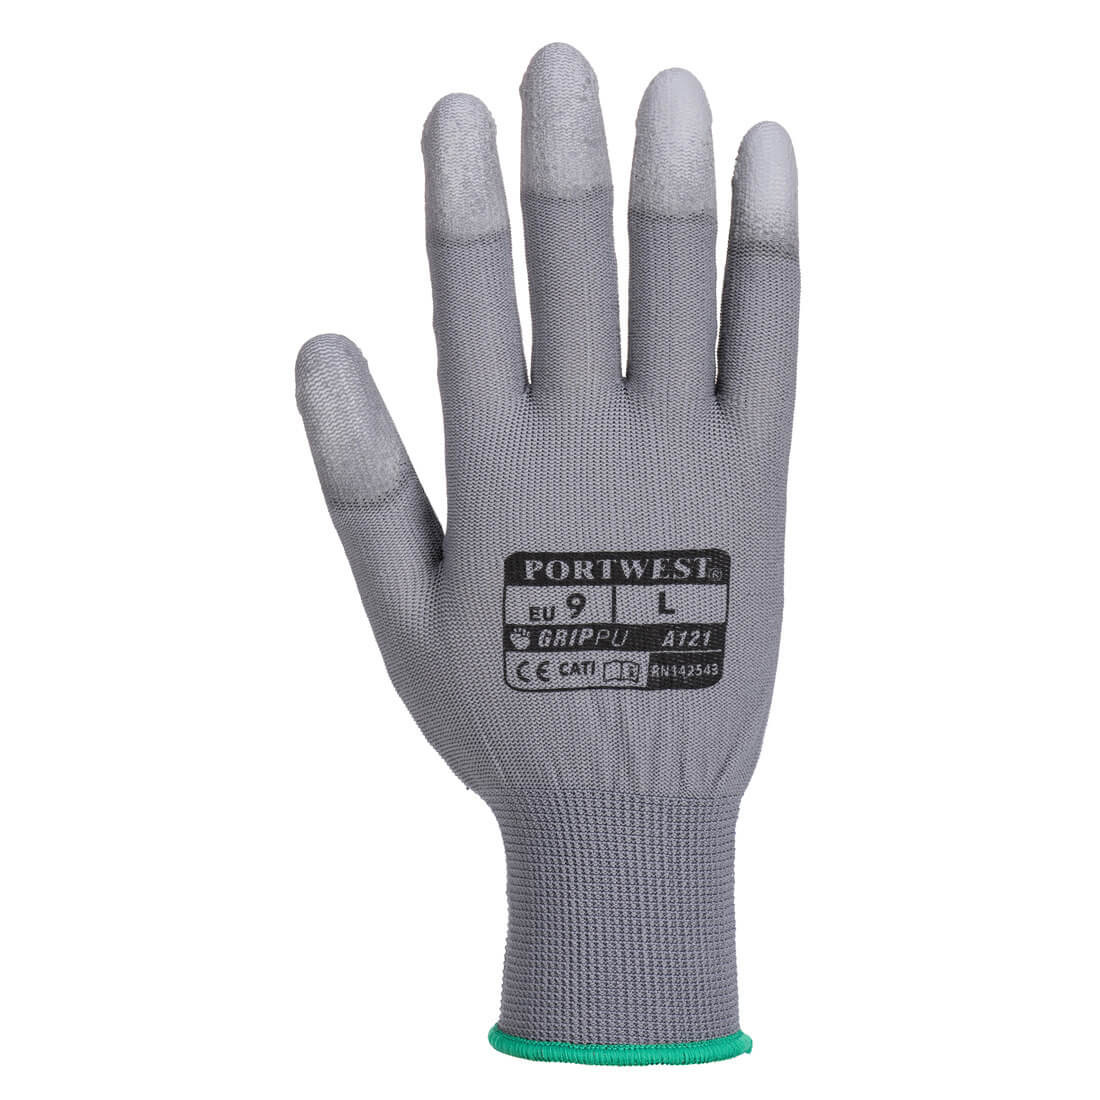 PU Fingertip Glove - Personal protection